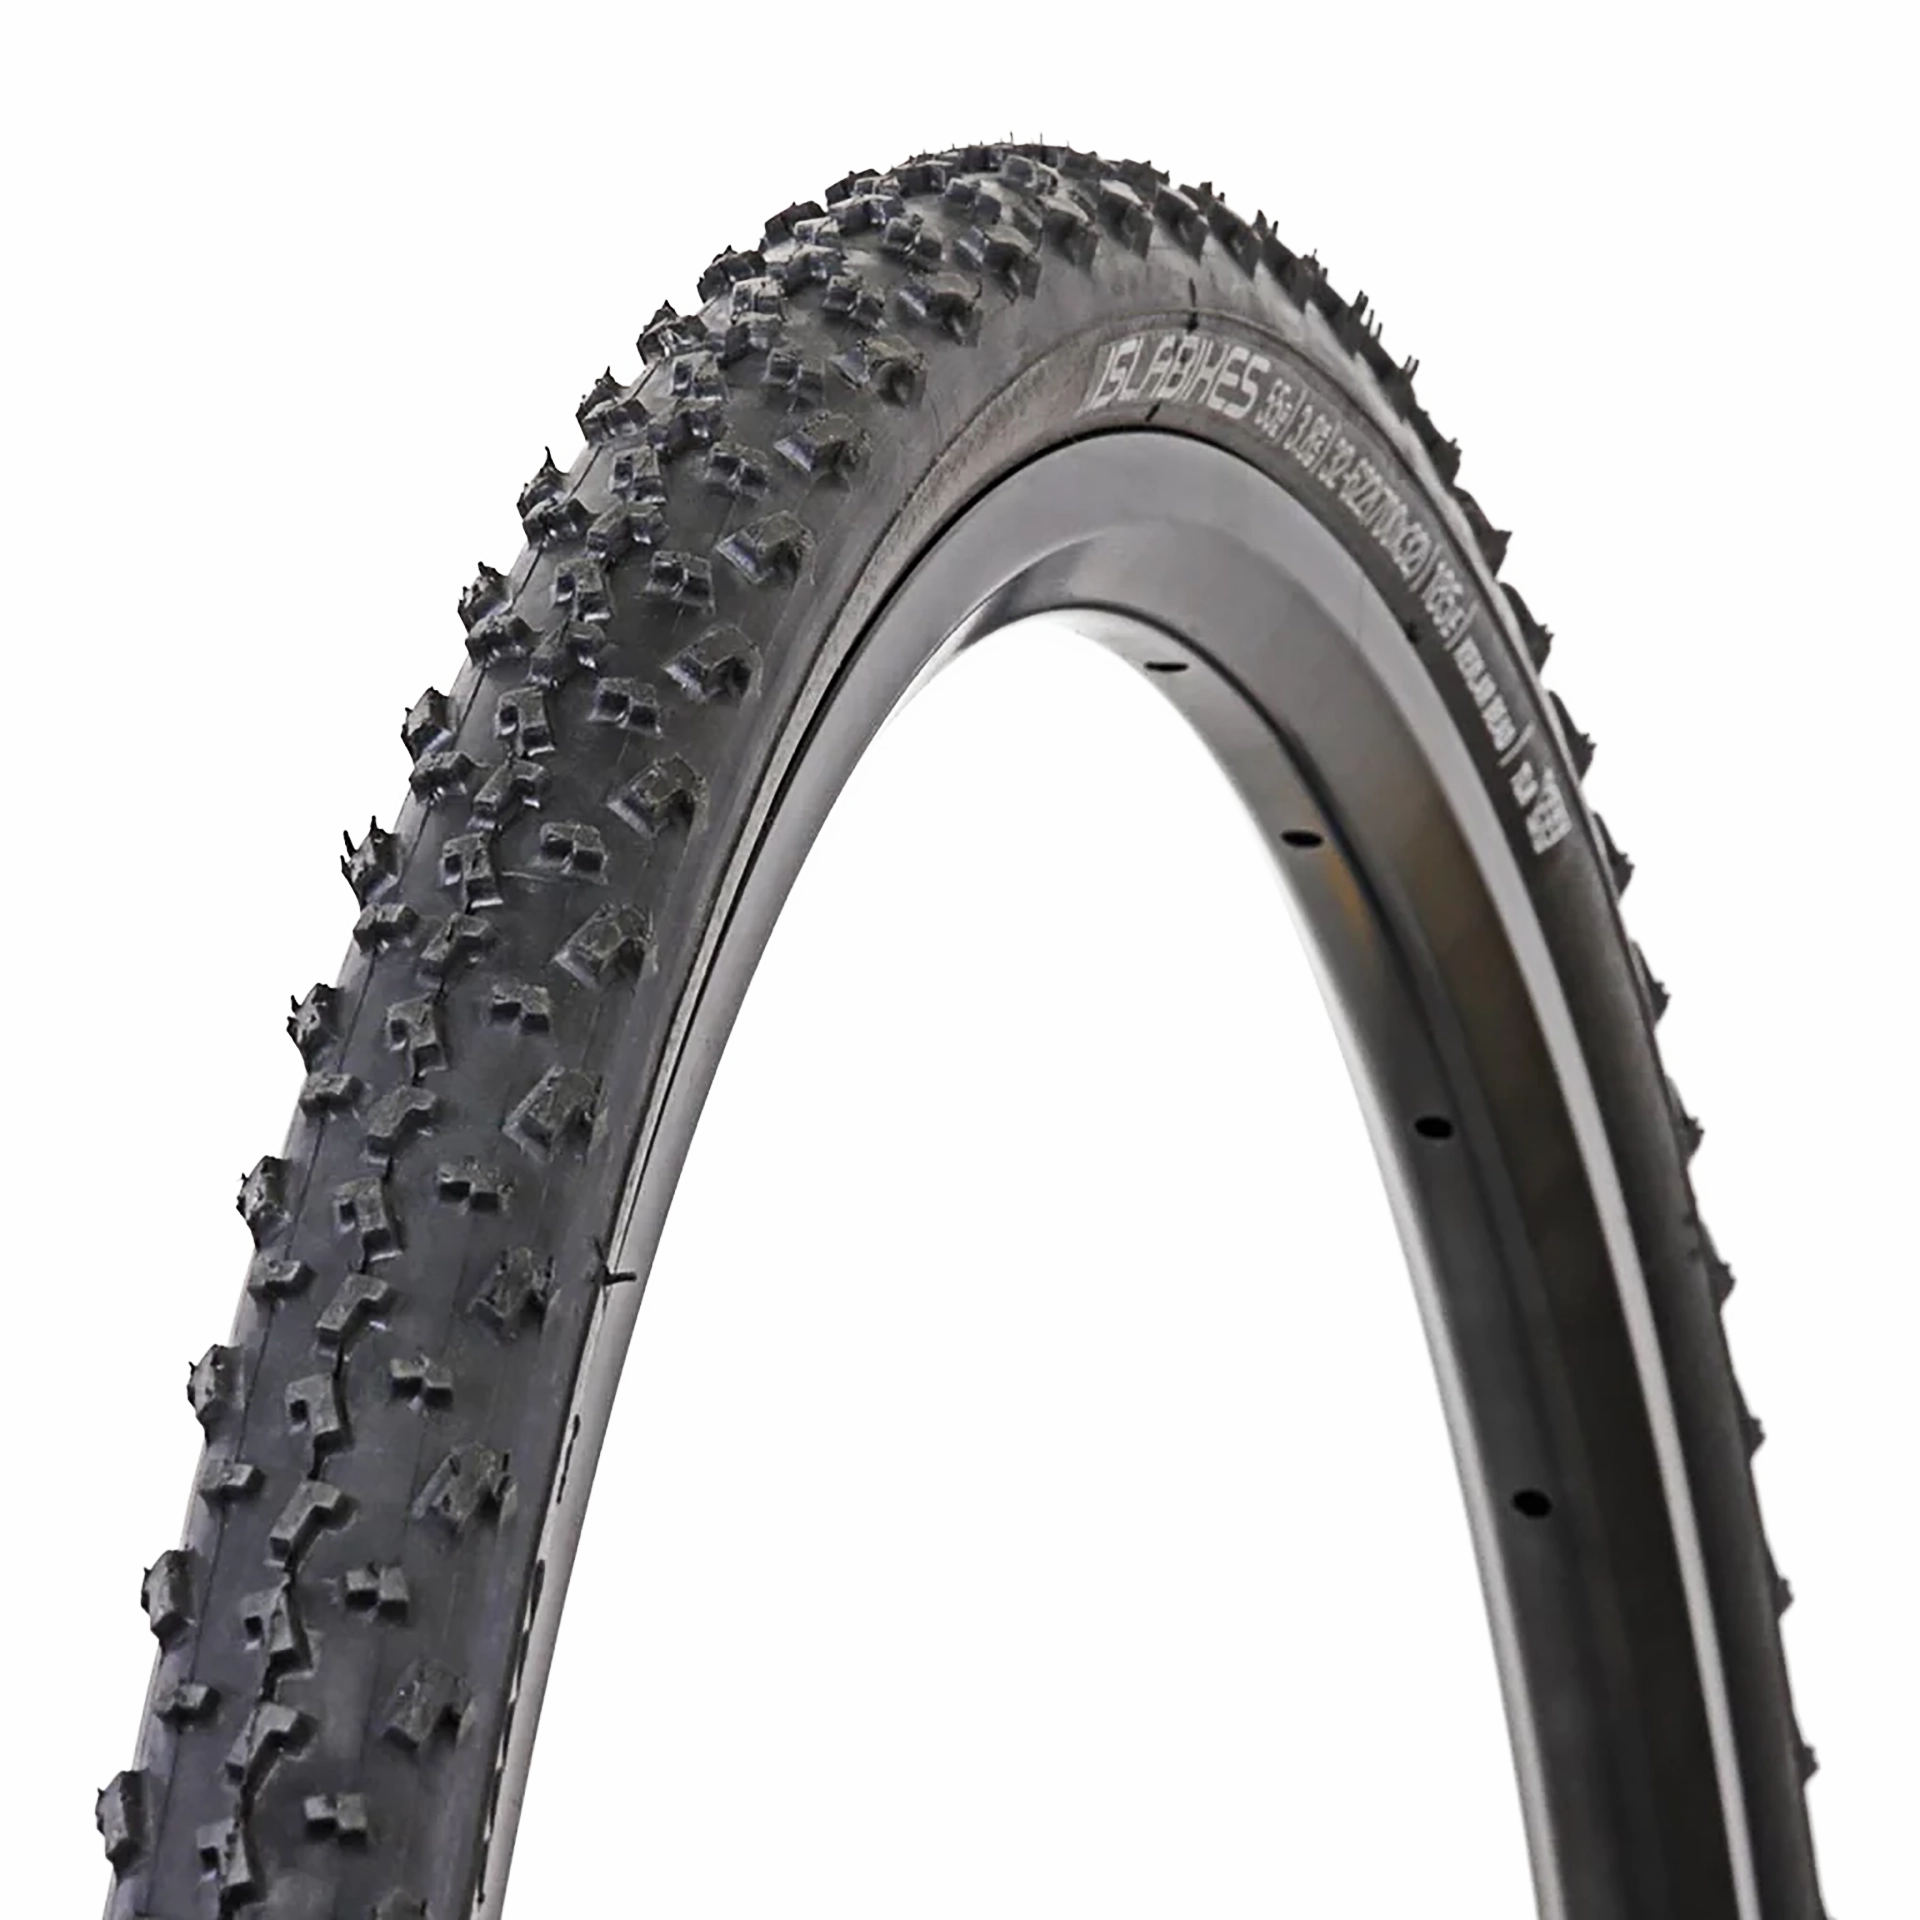 Tyre, cyclocross, 26x1.22" (31-559), Luath 26